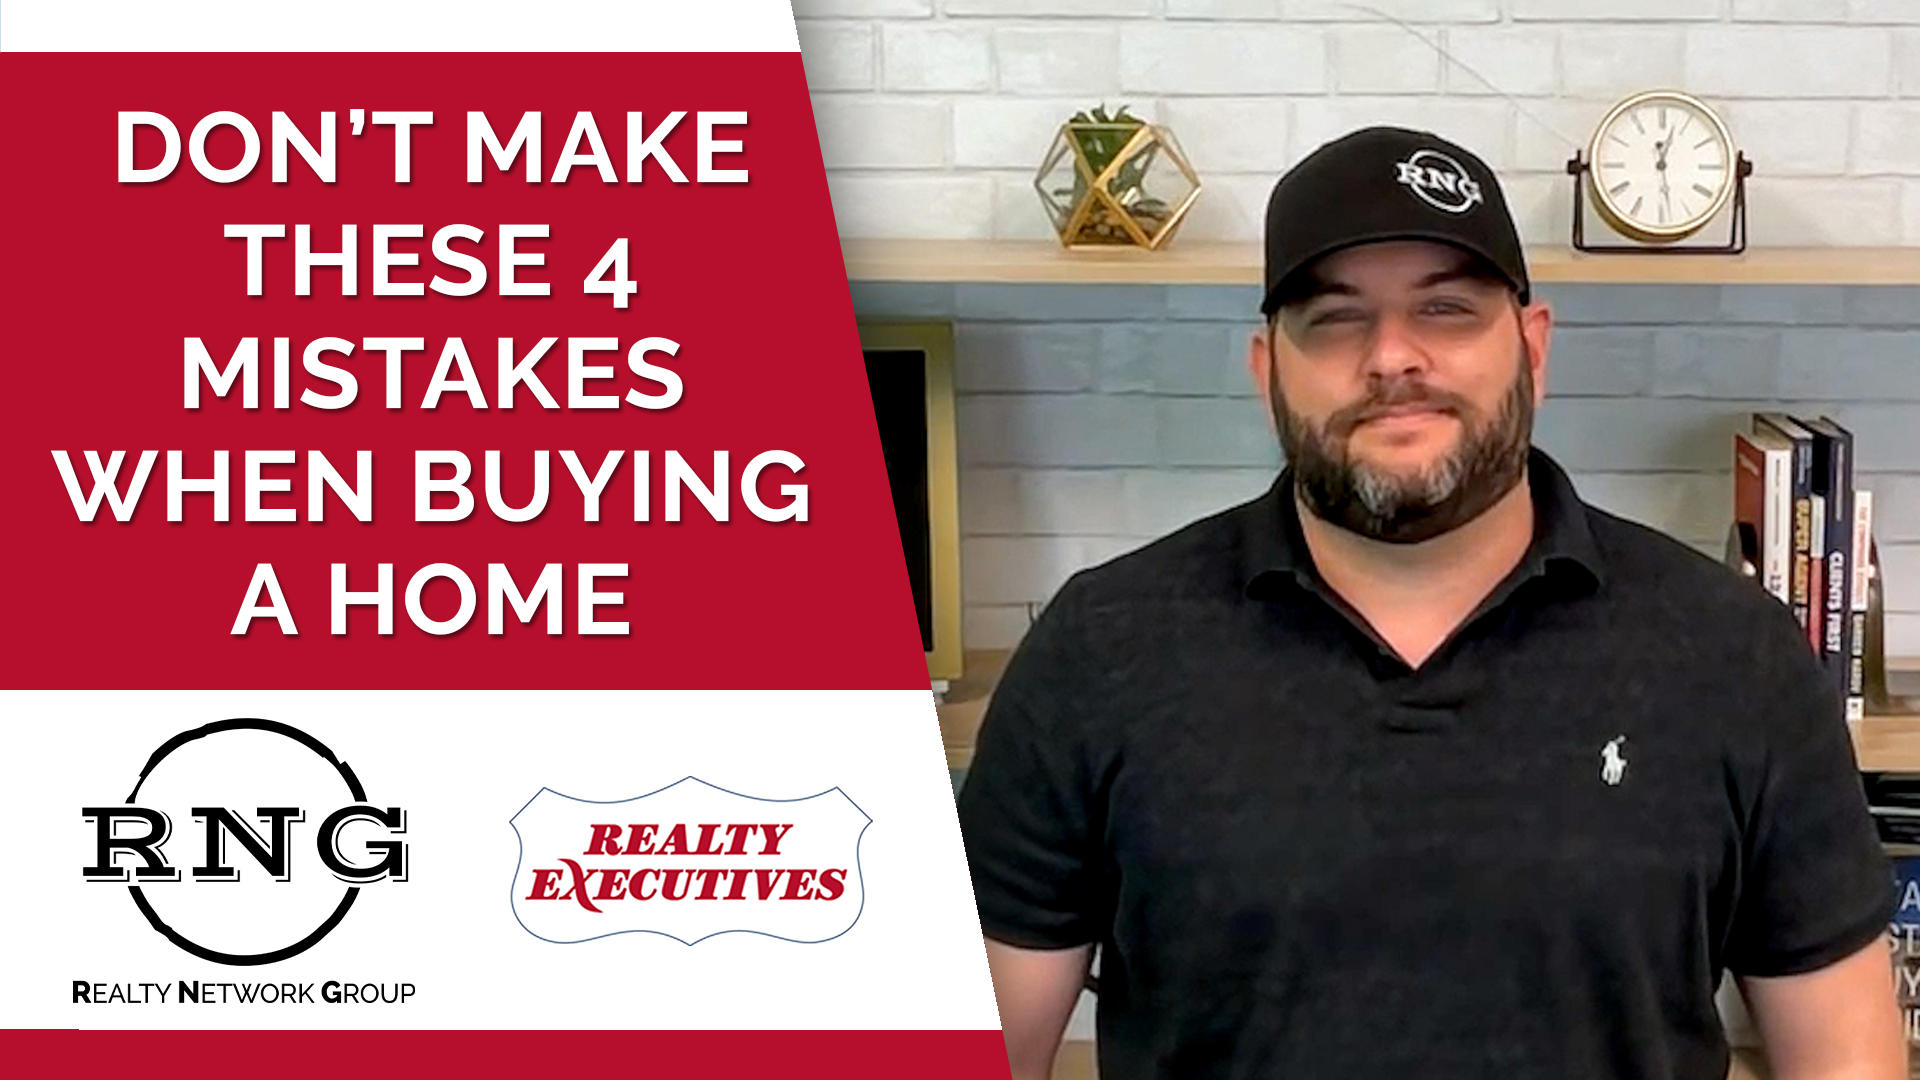 The 4 Biggest Homebuyer Mistakes and How To Steer Clear of Them